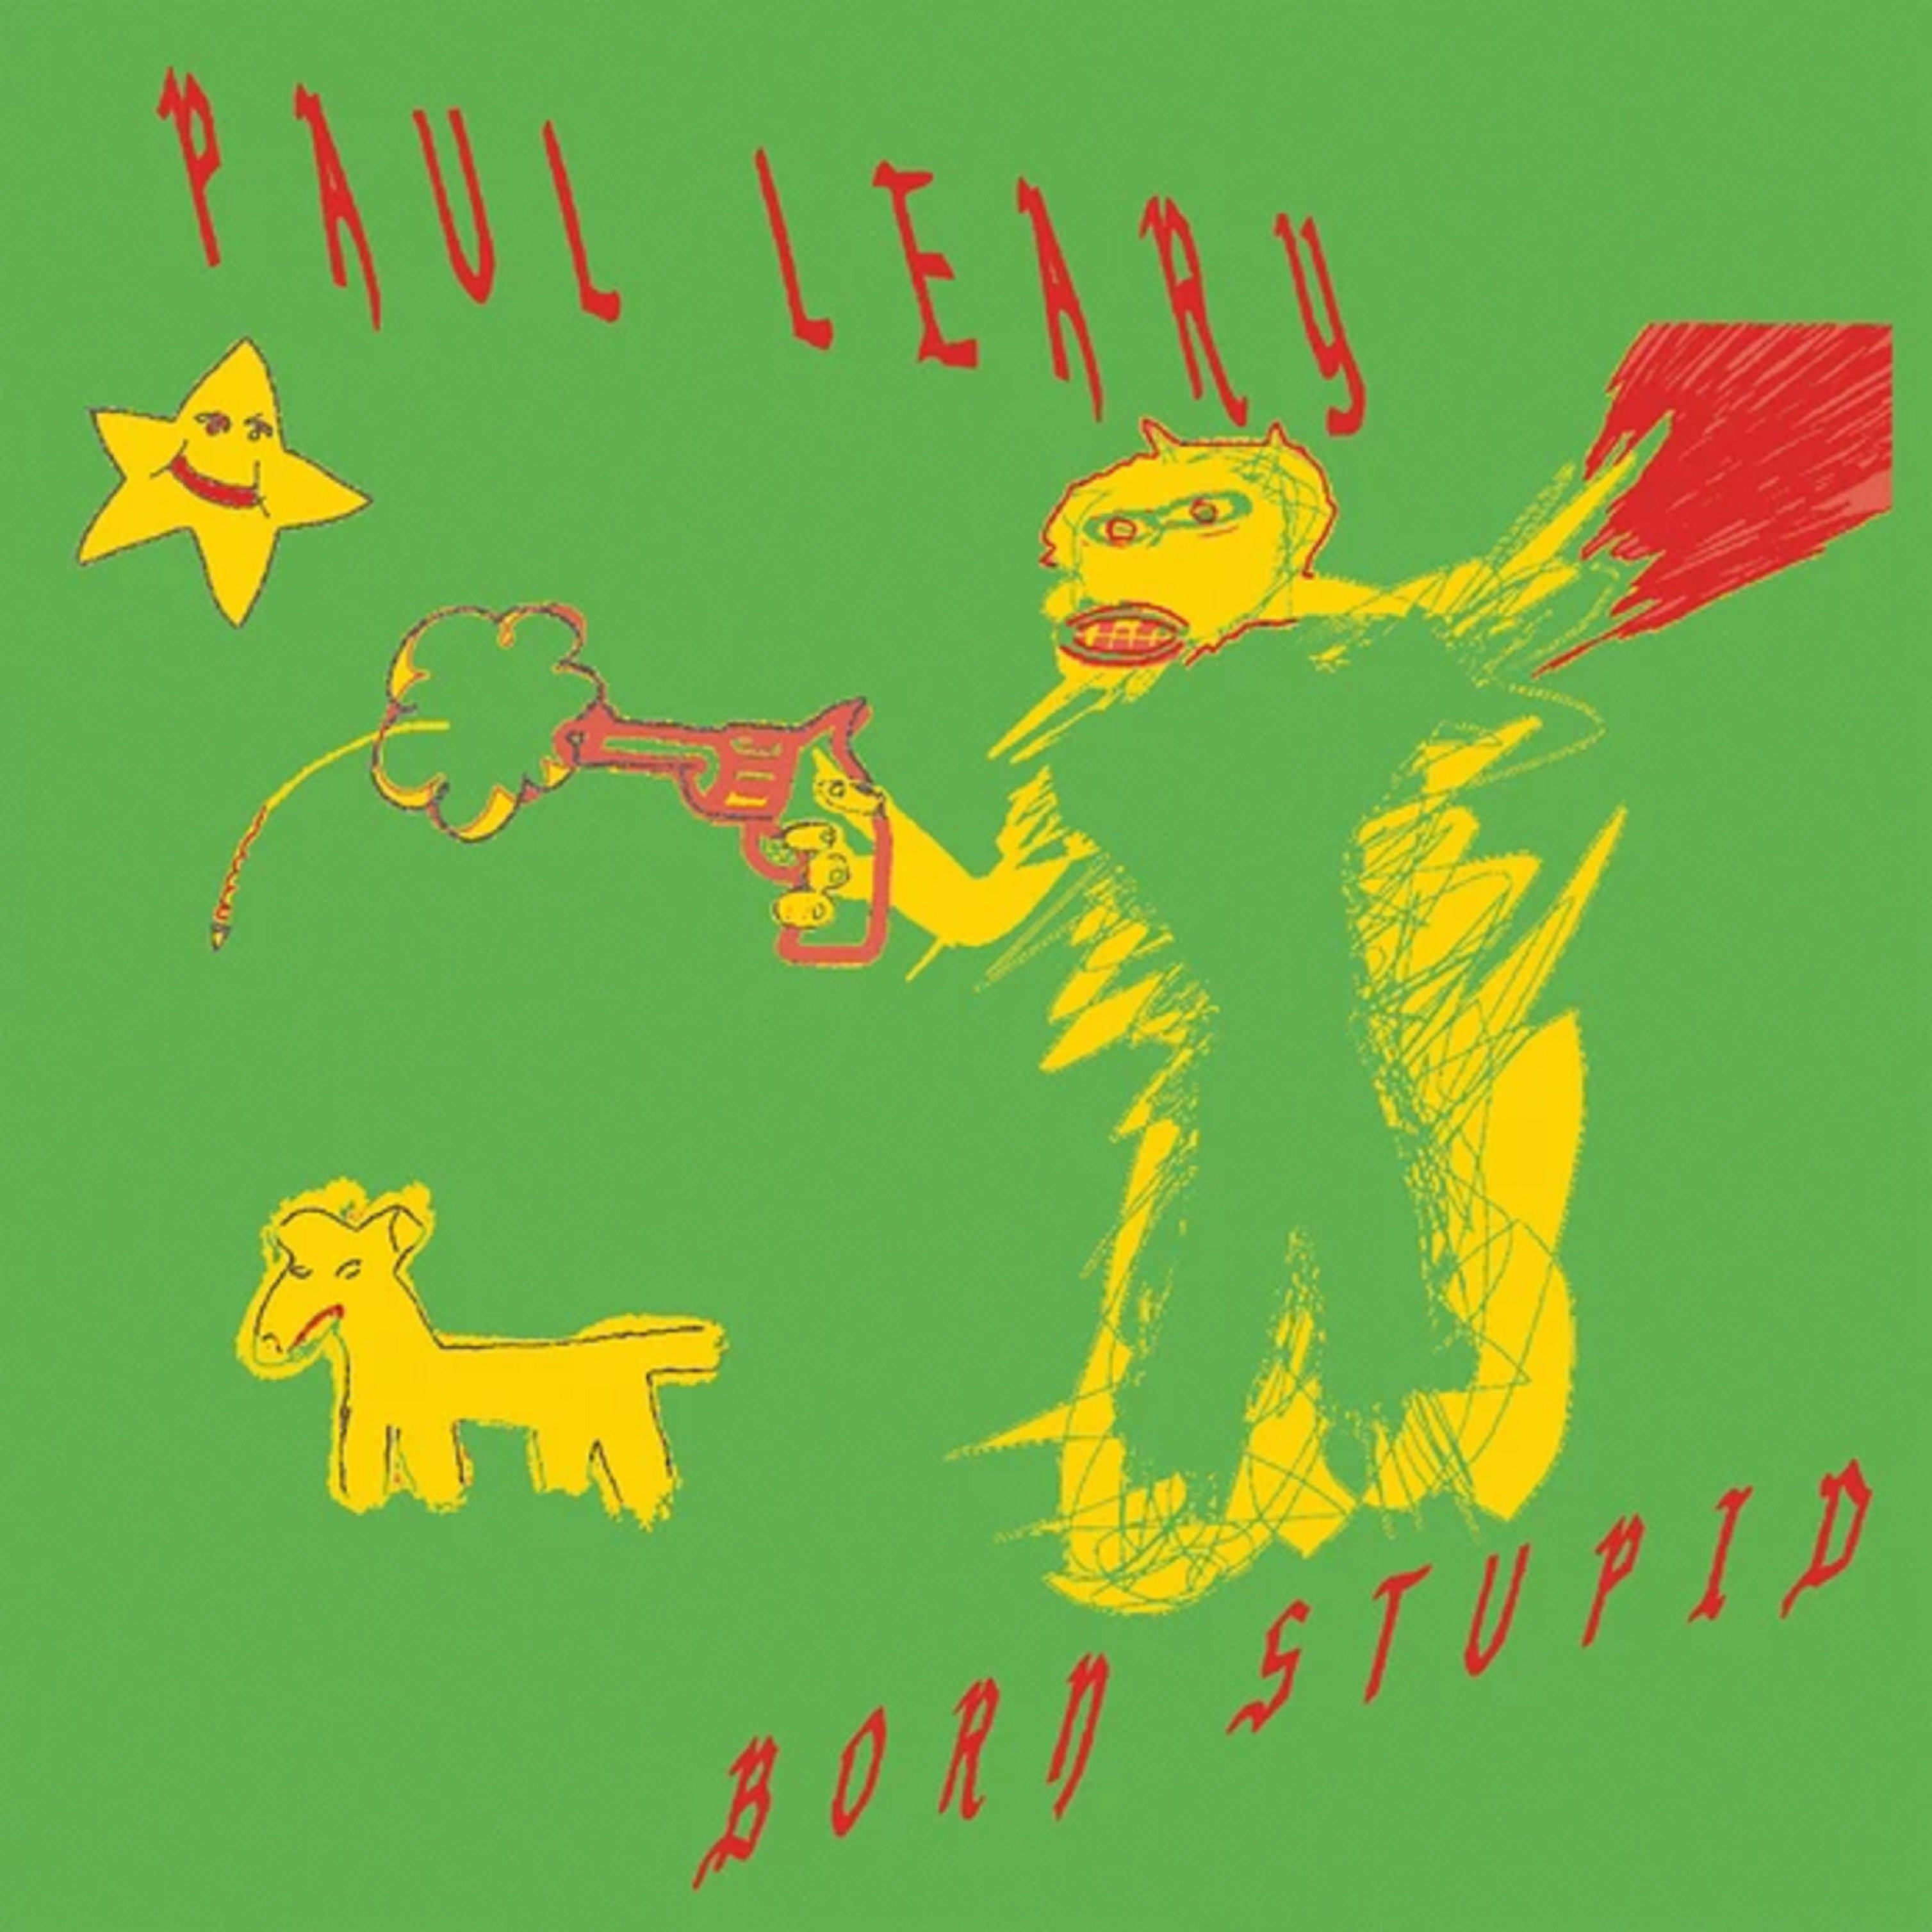 Paul Leary (Butthole Surfers) Shares "Gary Floyd Revisited" Video, 'Born Stupid' LP Out Now